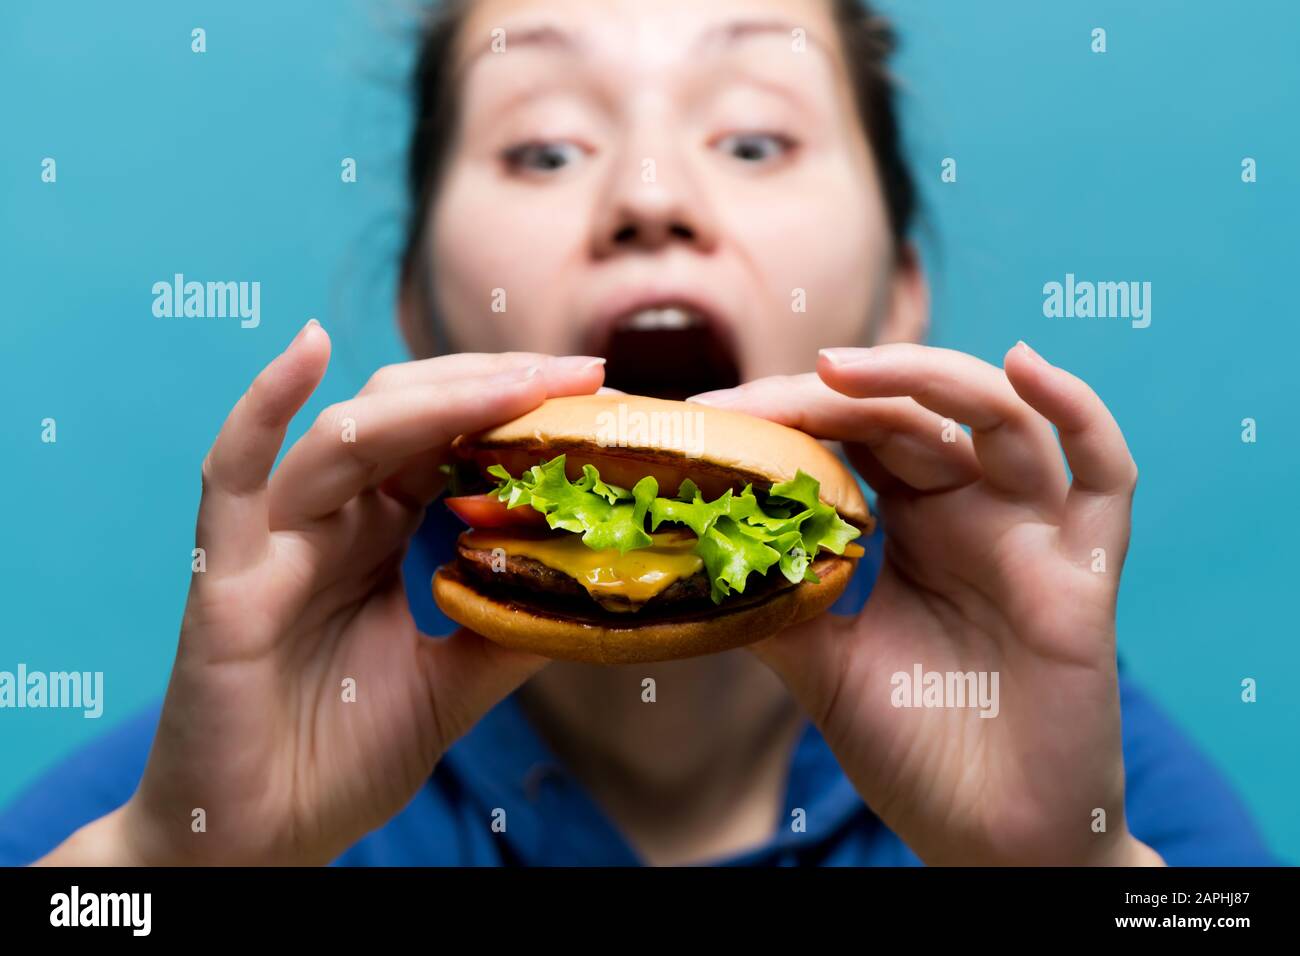 the girl opened her mouth and is going to eat her burger, which she holds in her hands. Selective focus Stock Photo